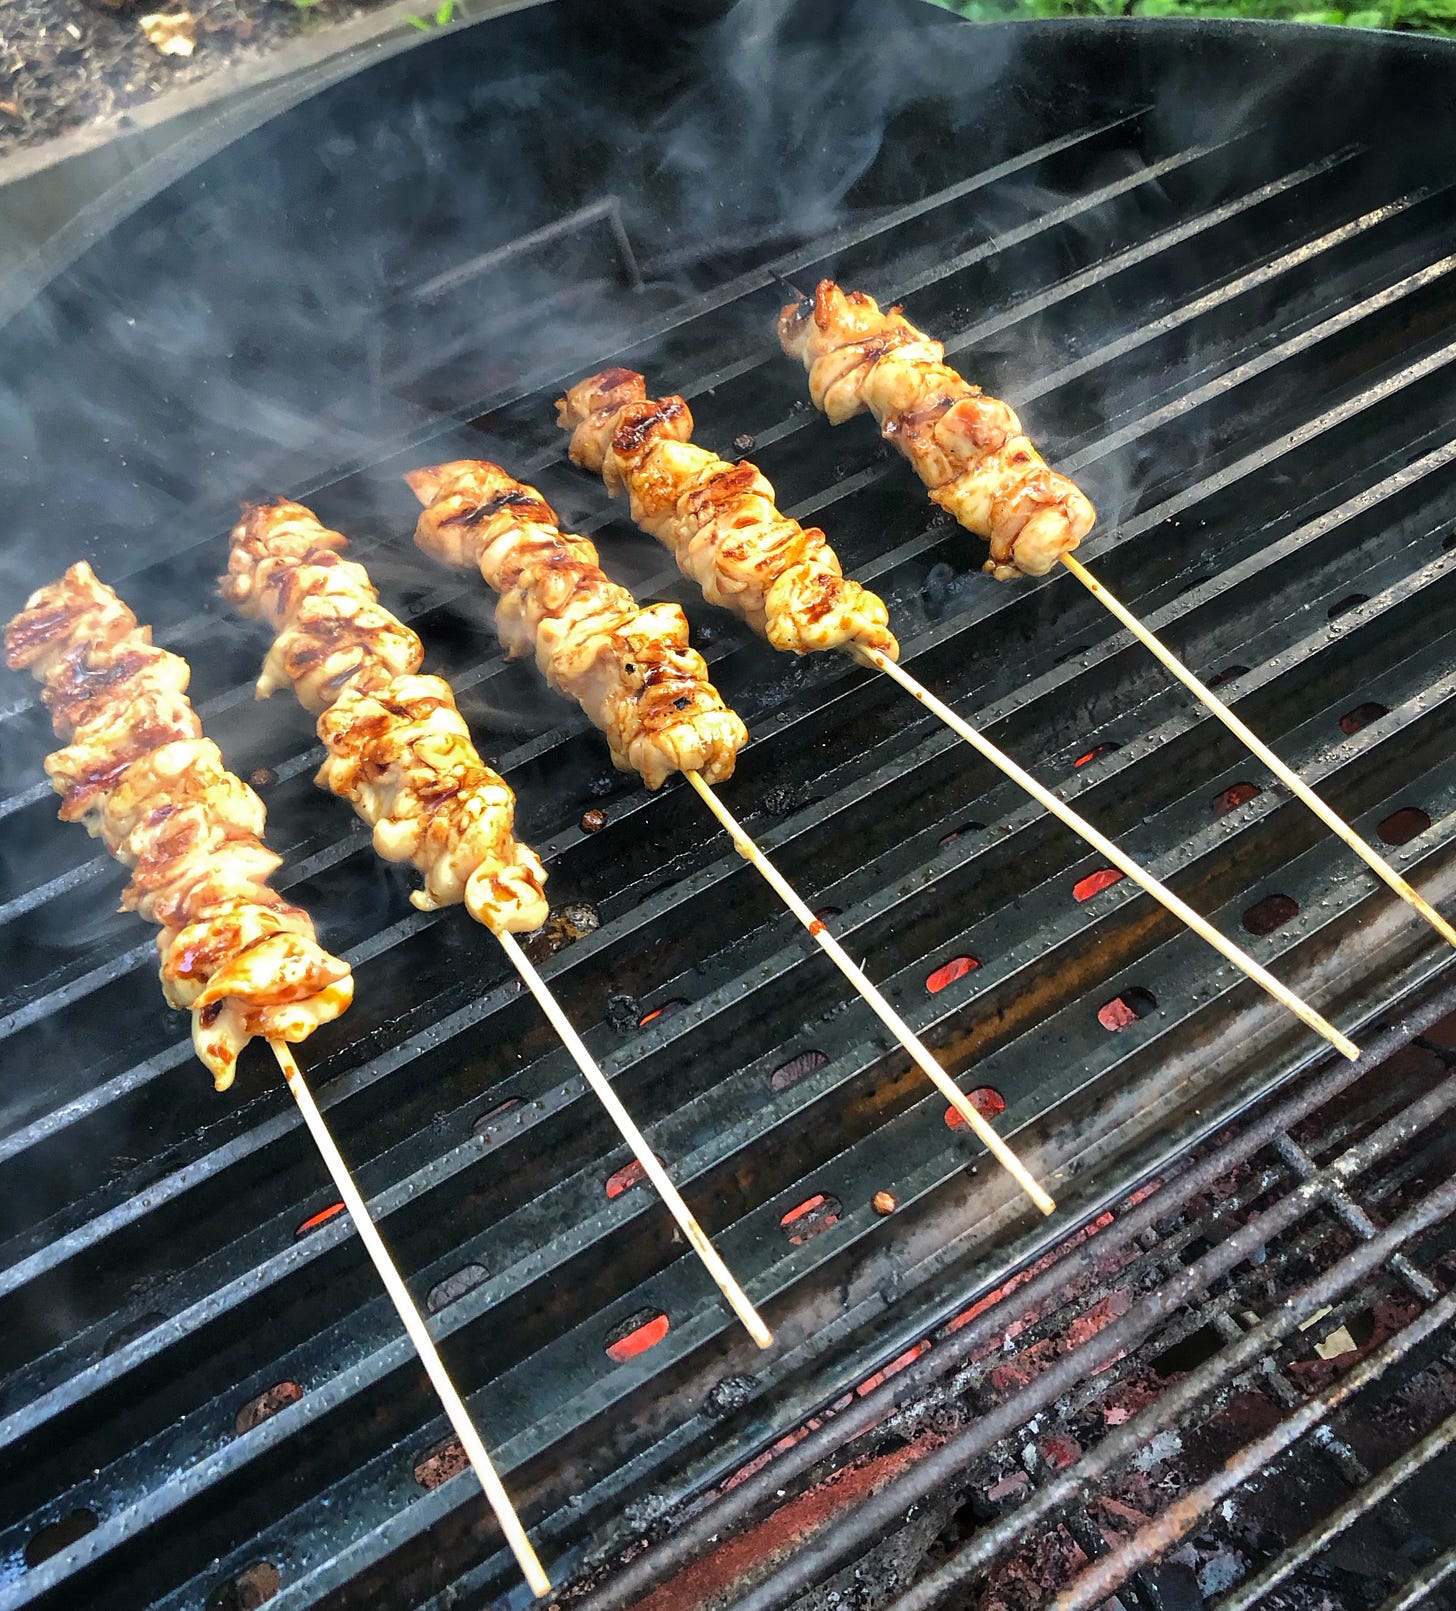 Skewers of chicken grilling on the ridged side of Grill Grates placed over a charcoal grill